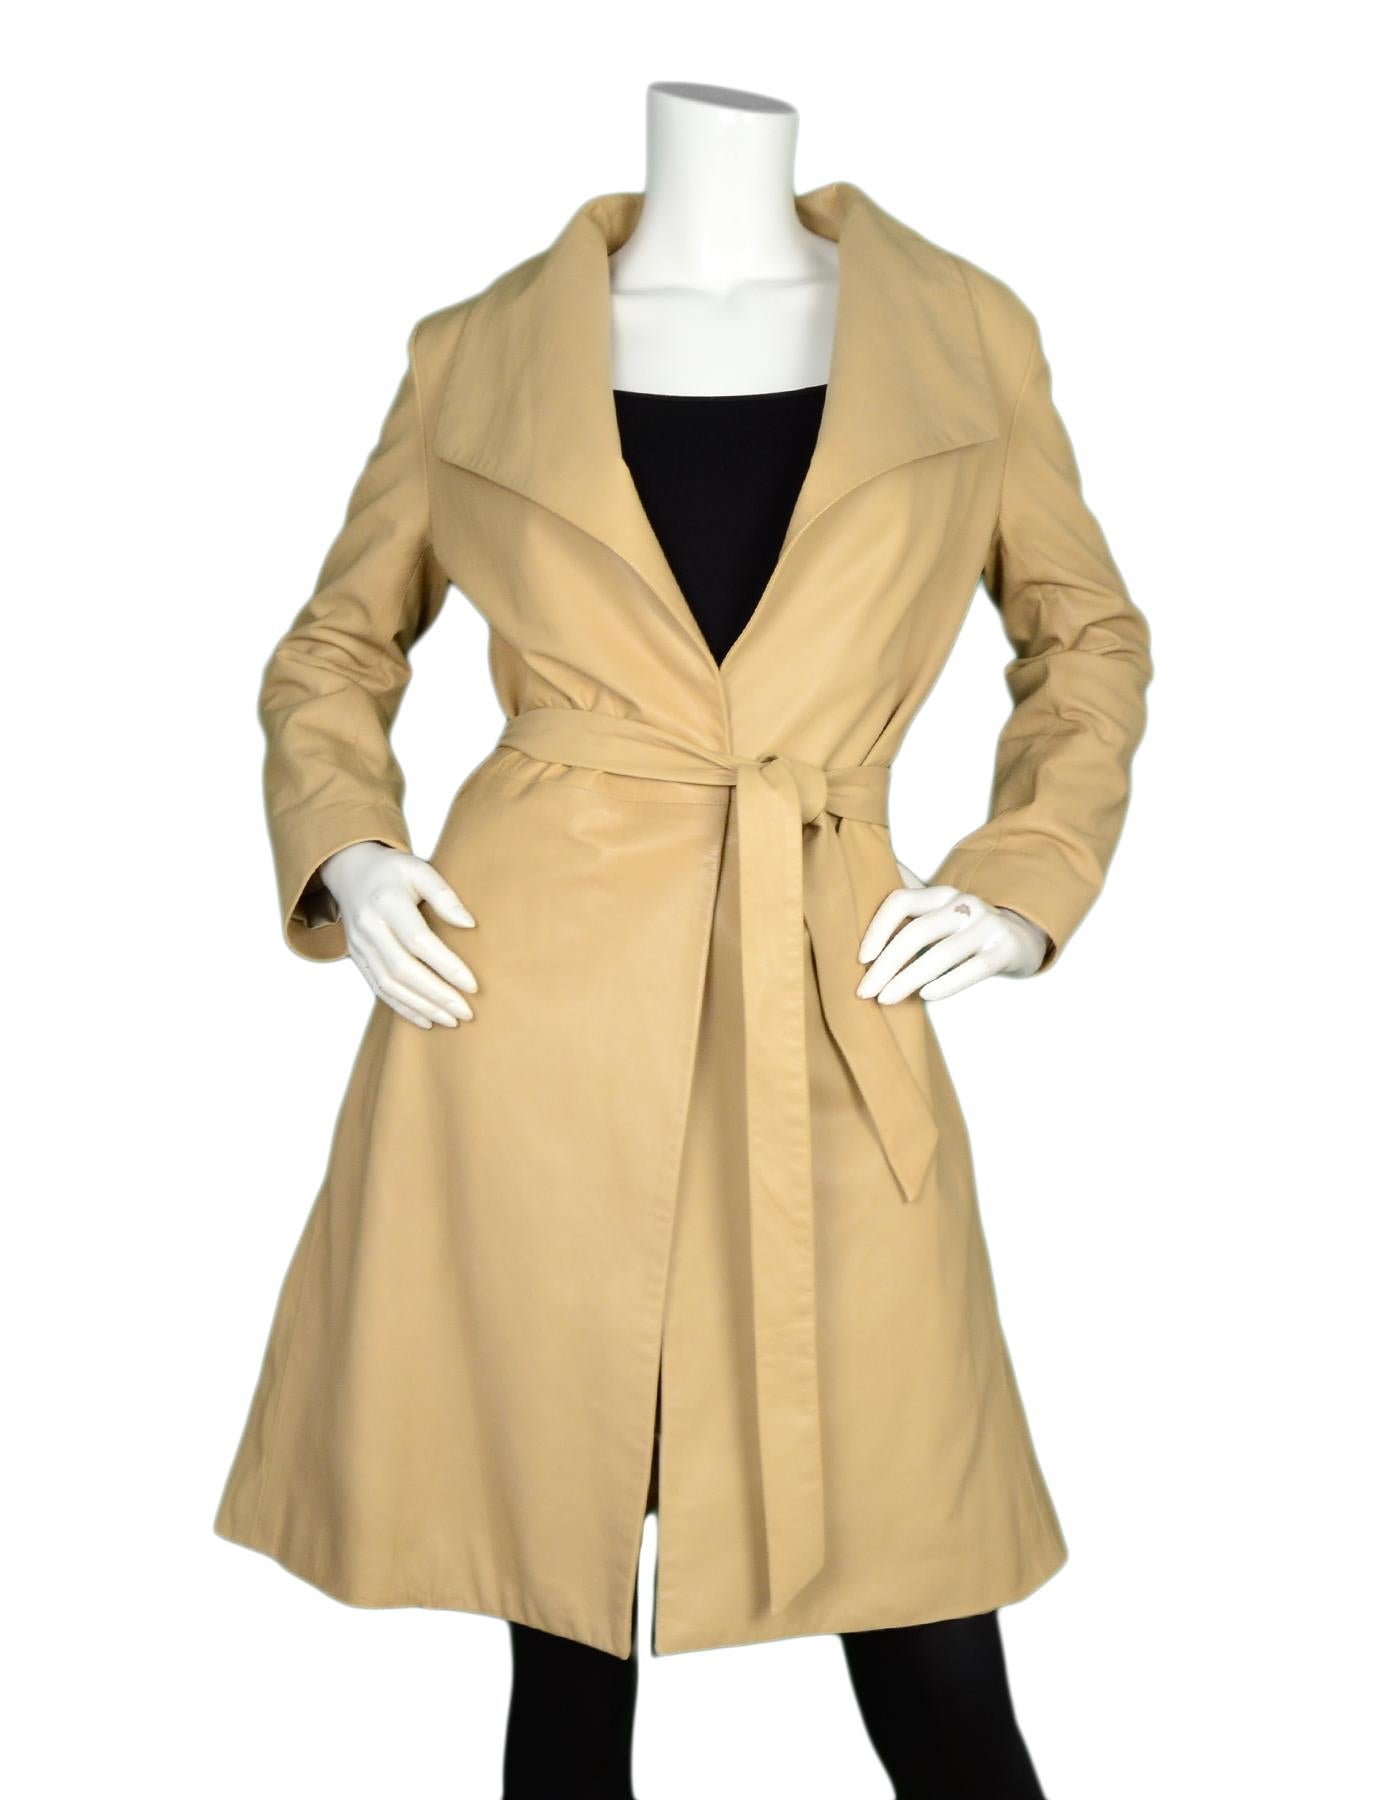 The Row Beige Leather Wrap Coat W/ Belt Sz 8

Made In: USA
Color: Beige
Materials: Leather (no composition tag)
Lining: Polyester (no composition tag)
Opening/Closure: Open front with belt
Overall Condition: Very good pre-owned condition with